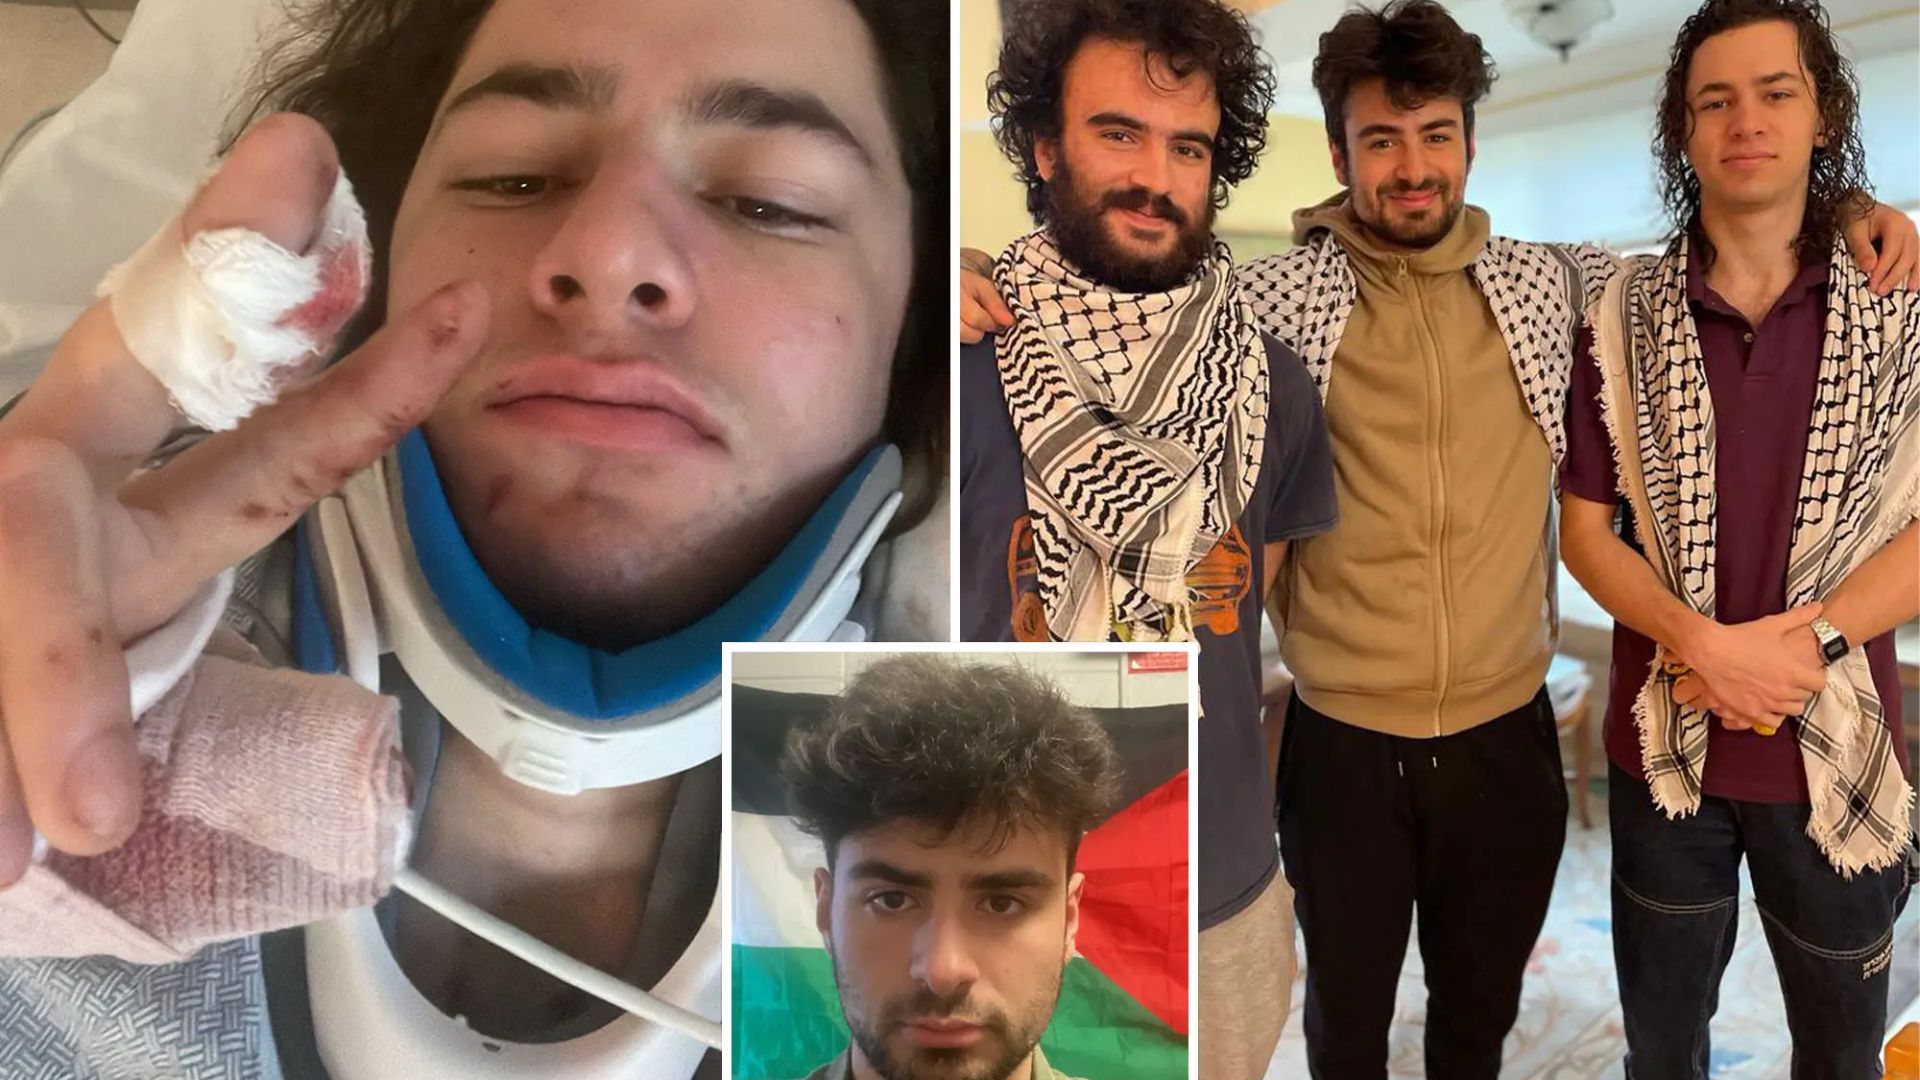 Three Palestinian college students shot in the US